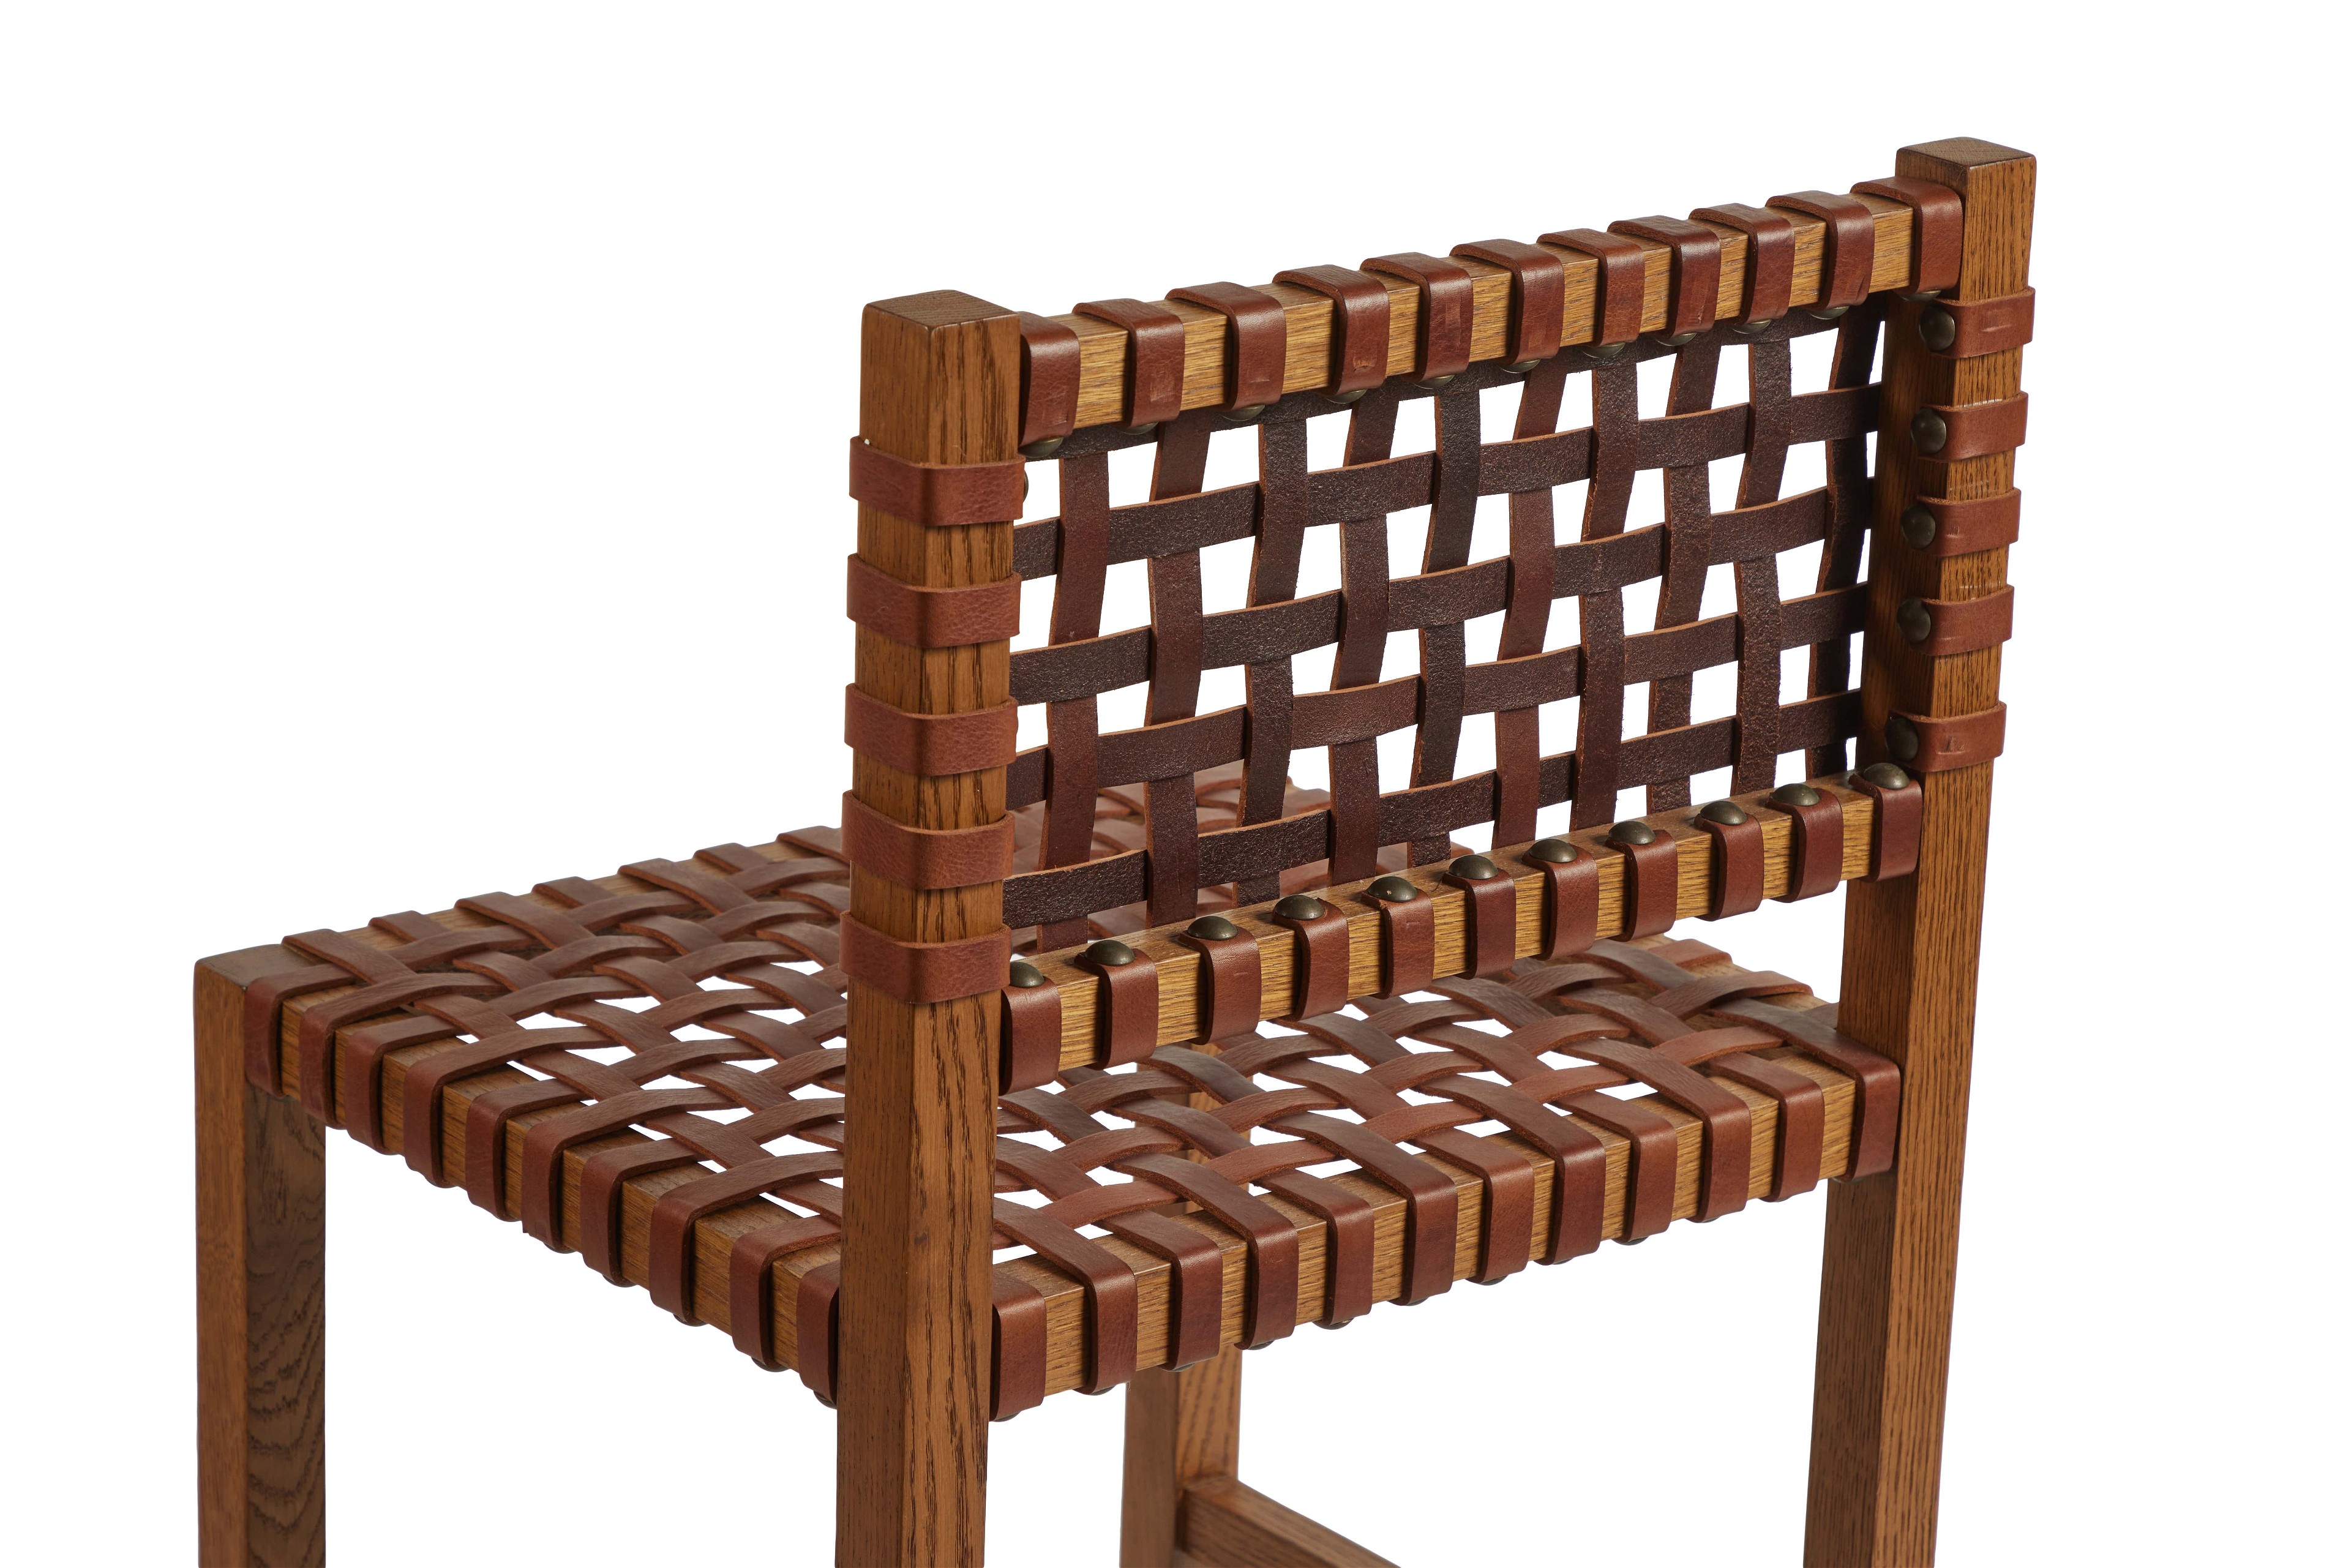 a wooden chair made out of strips of wood